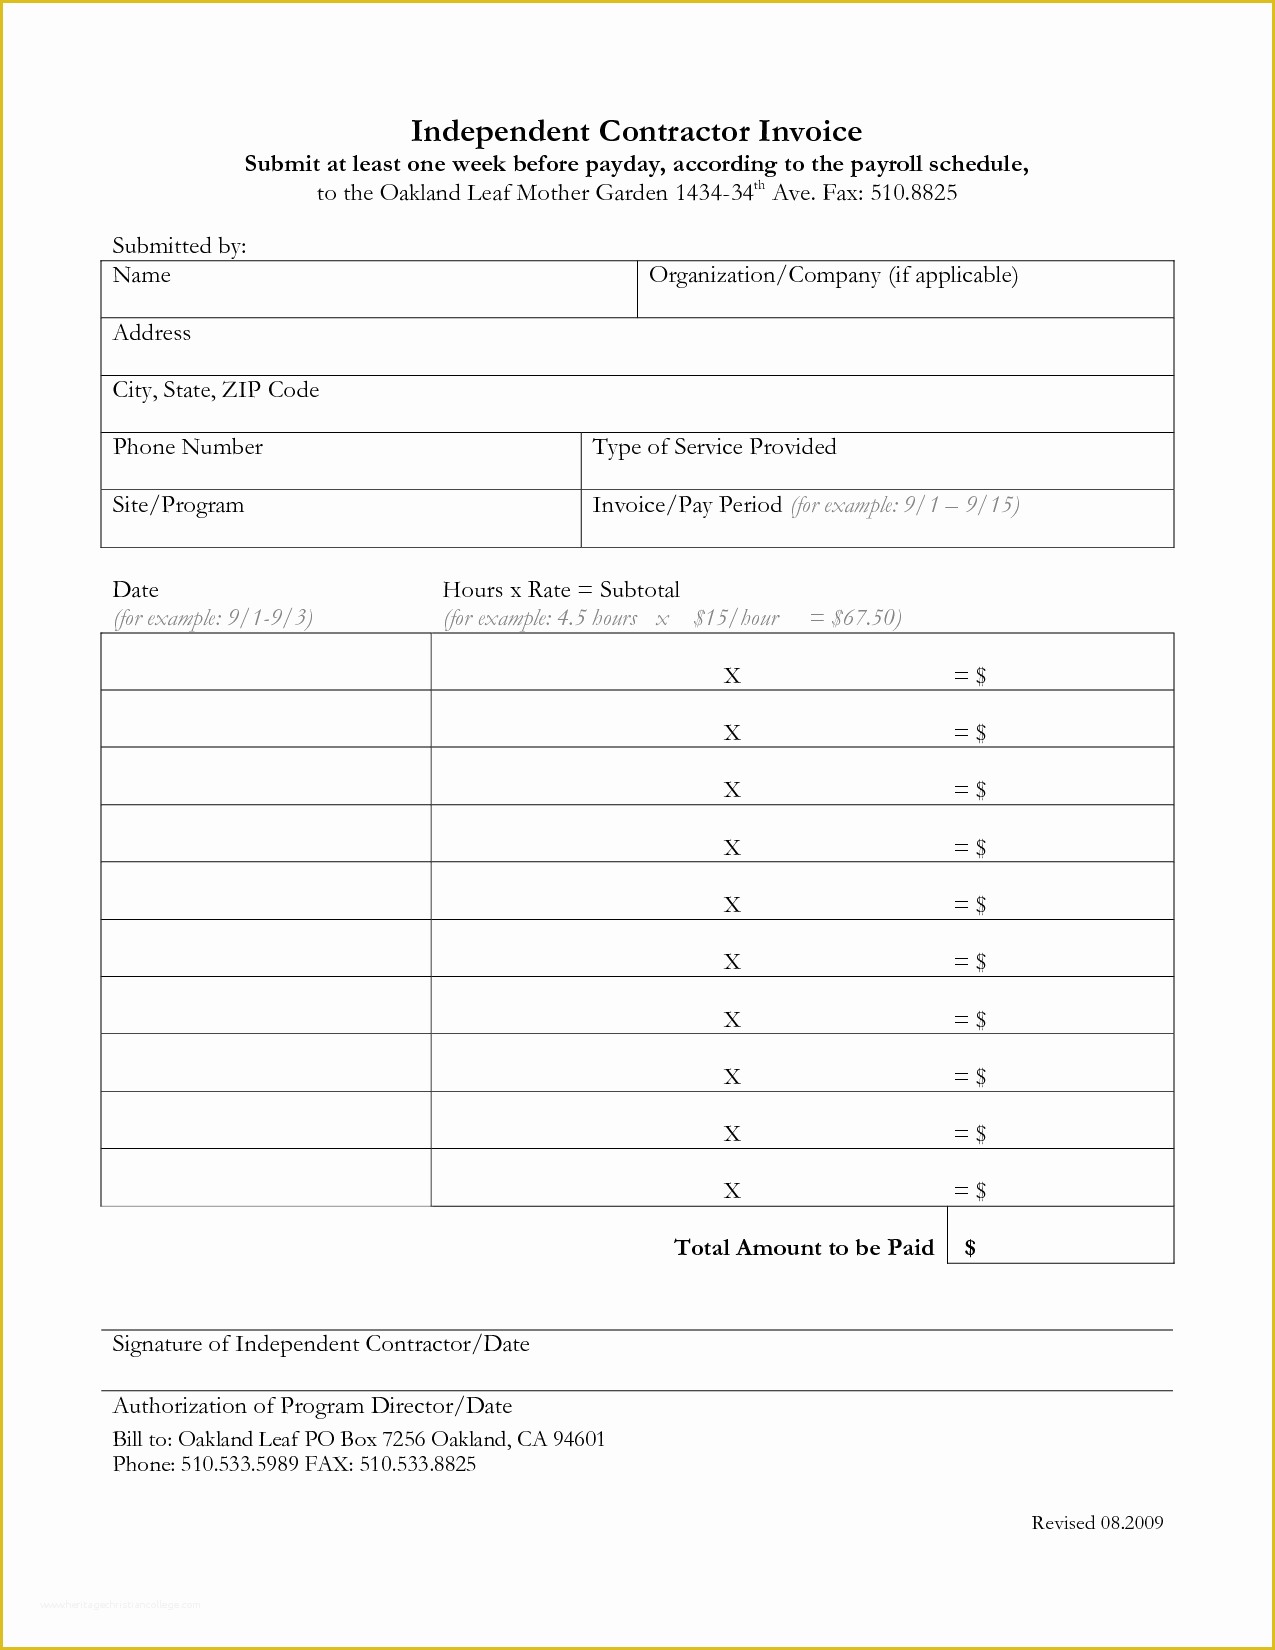 Free Contractor Invoice Template Of Independent Contractor Invoice Template Free